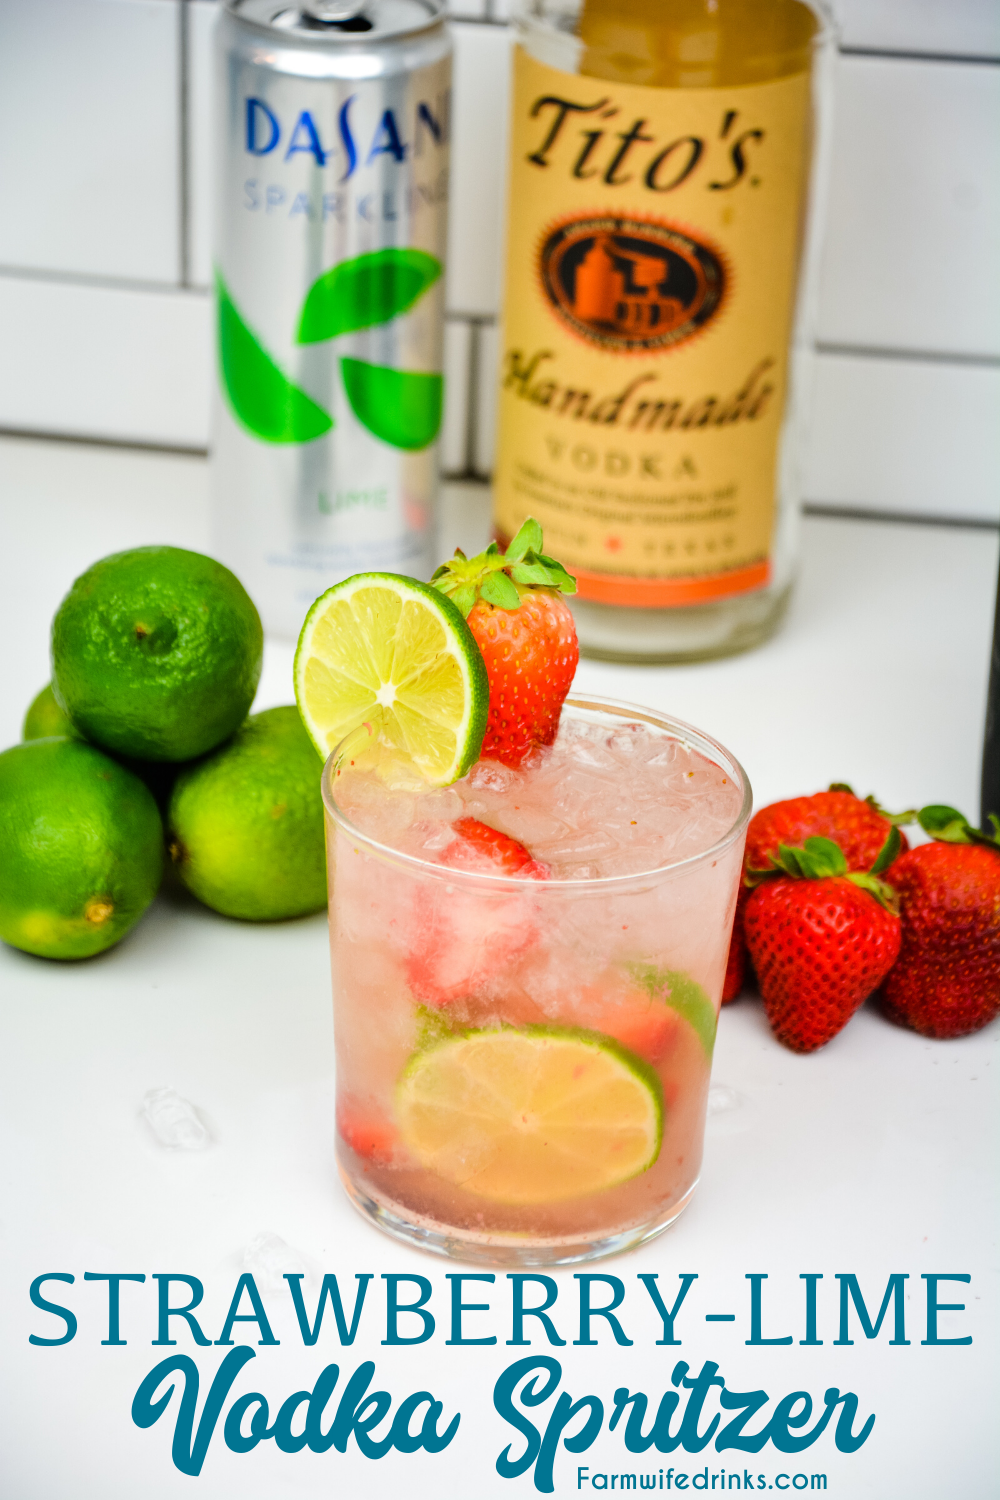 Strawberry Lime Vodka Spritzer is a refreshing cocktail recipe made with fresh fruit, vodka, and soda water for a low-carb cocktail.